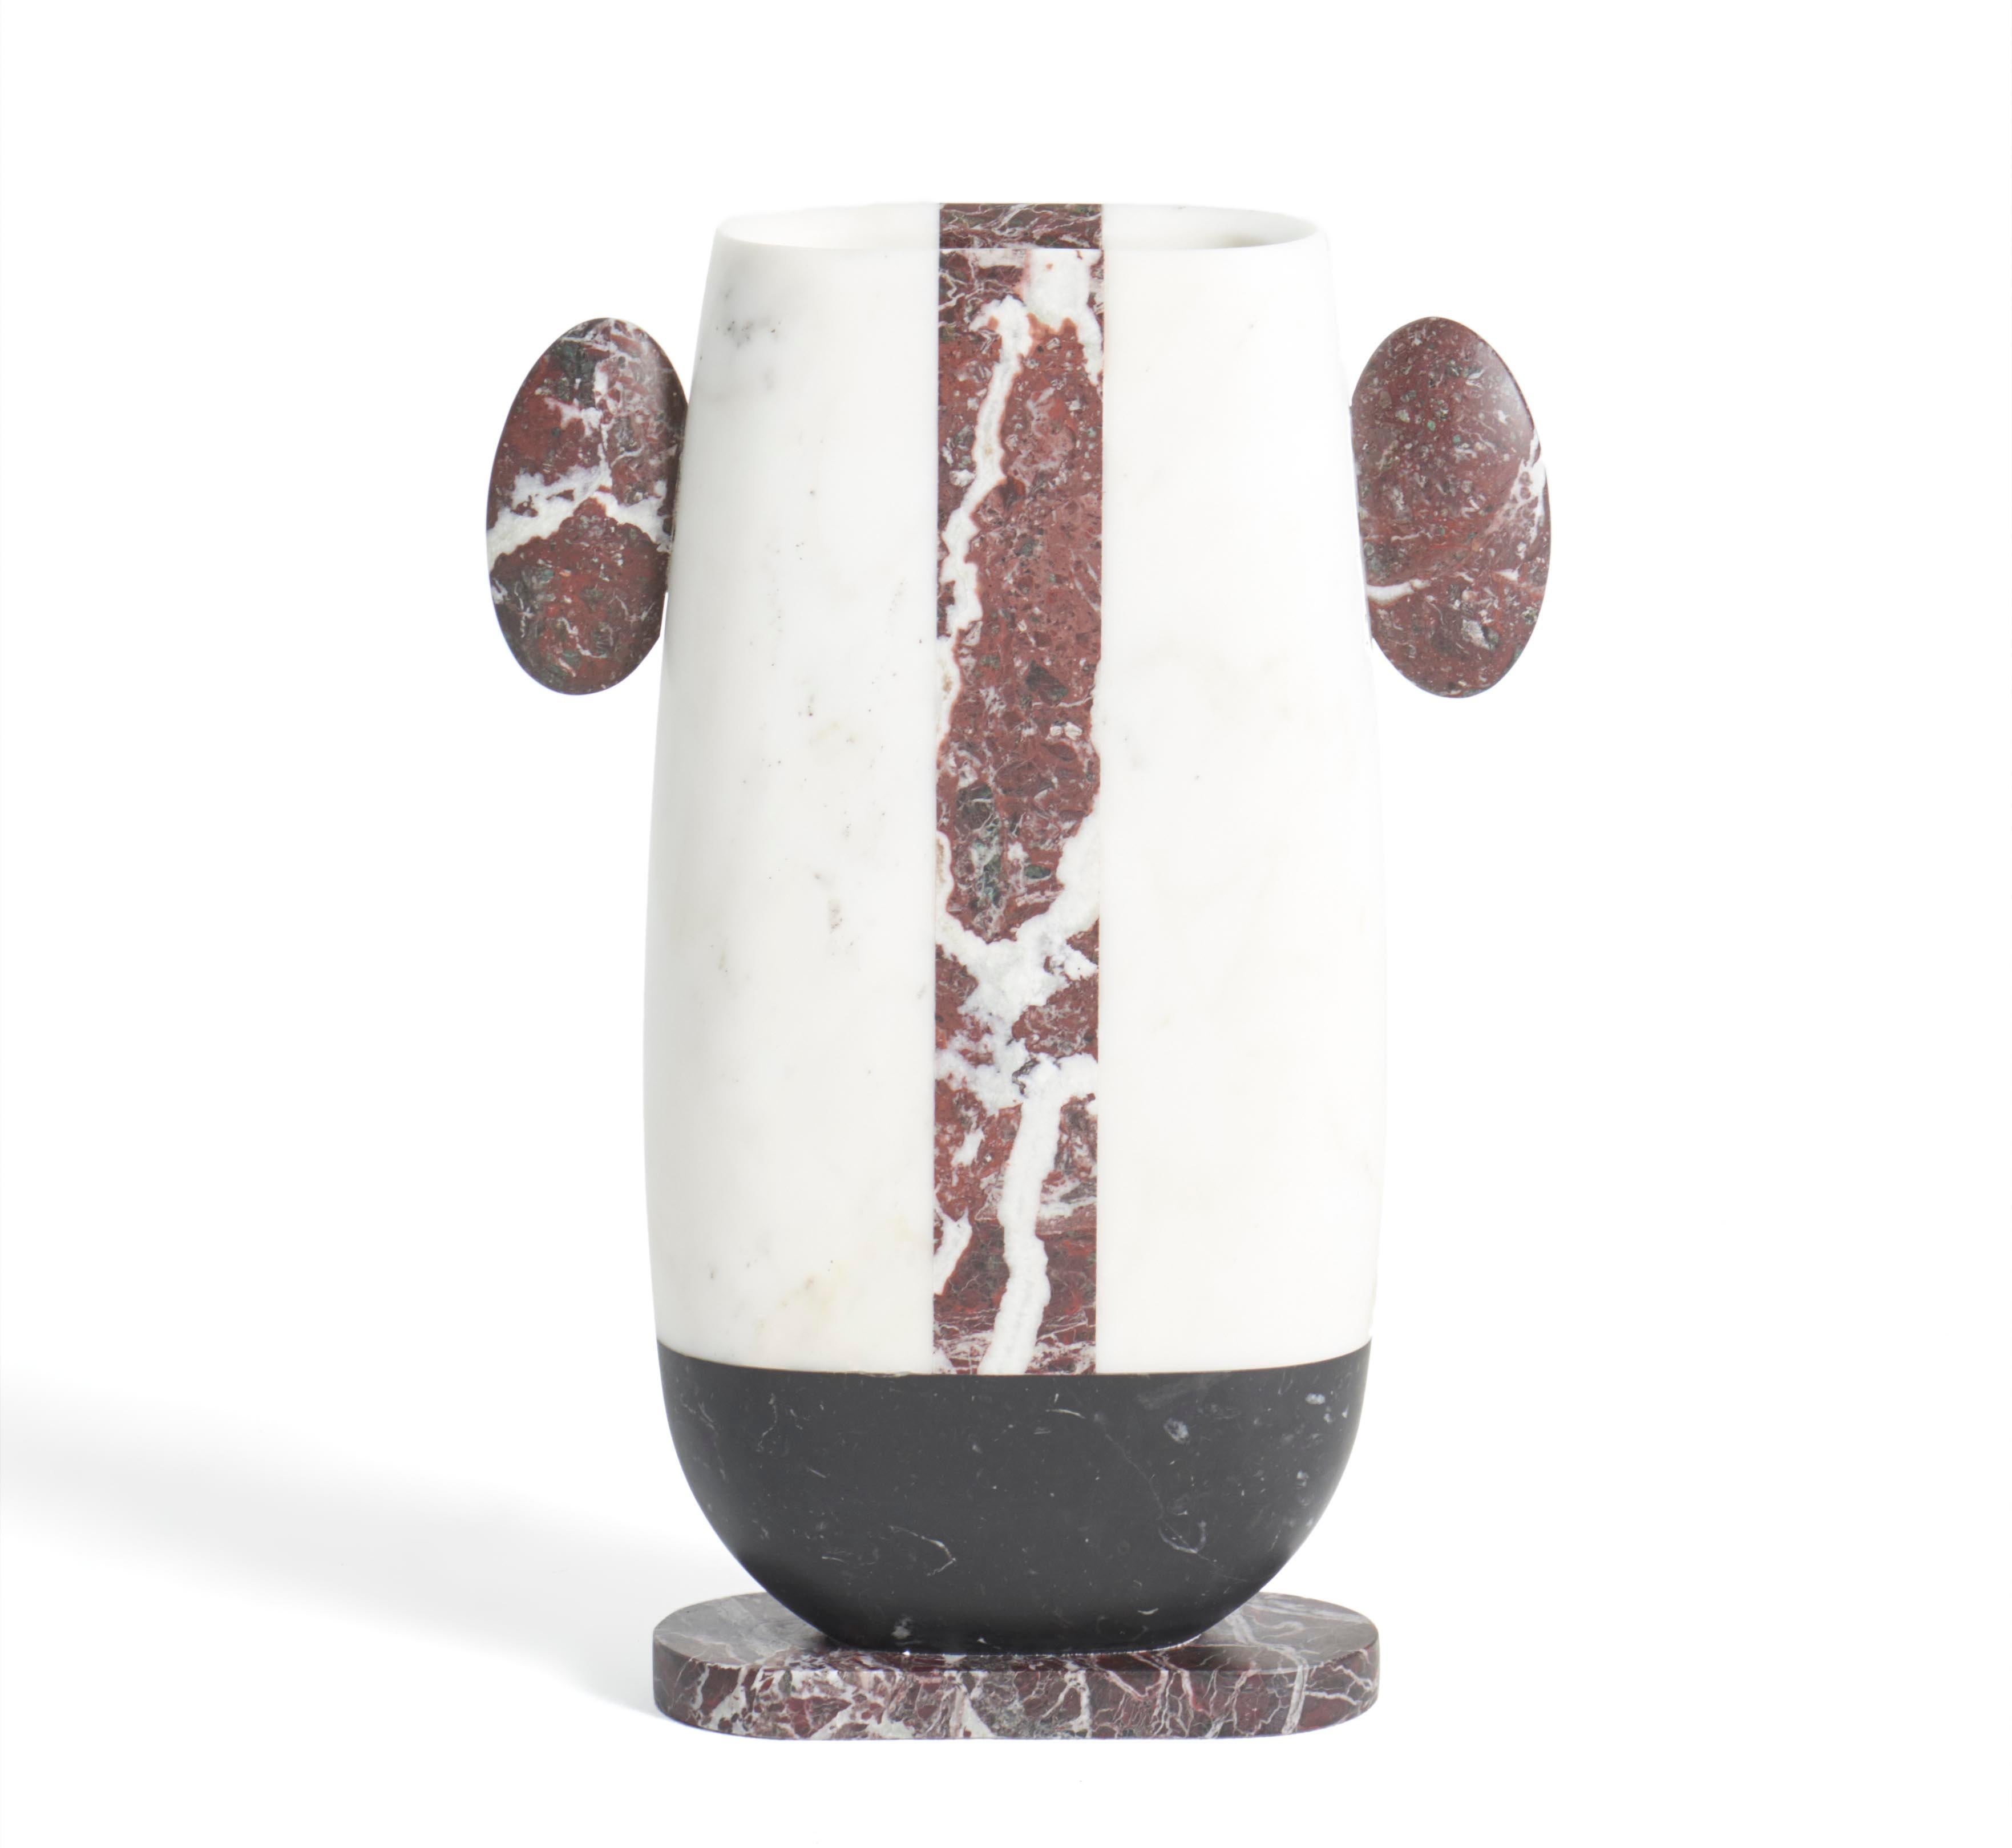 Pietro marble vase by Matteo Cibic
Dimensions: 10.7 x 2.9 x 15.1 cm
Materials: 
Bianco
Michelangelo,
Rosso Levanto

Vases made of various marbles cannot guarantee watertightness, better not use for cut flowers unless with the use vials for